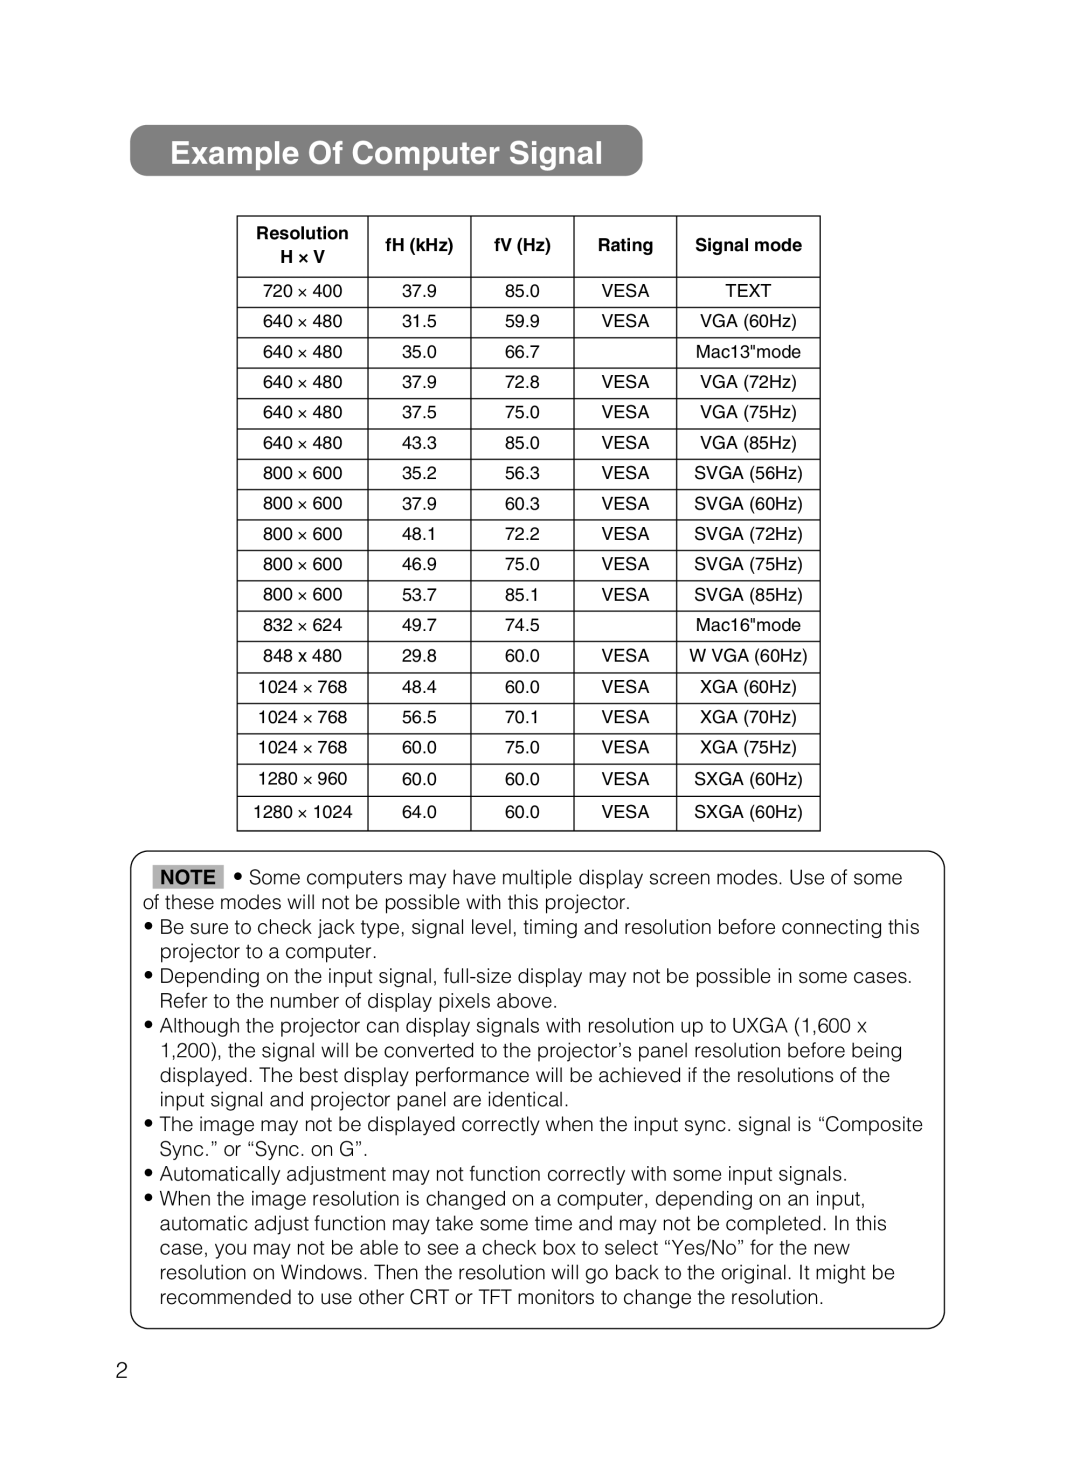 Hitachi HOME-1 user manual Example Of Computer Signal, Resolution, fH kHz, fV Hz, Rating, Signal mode 